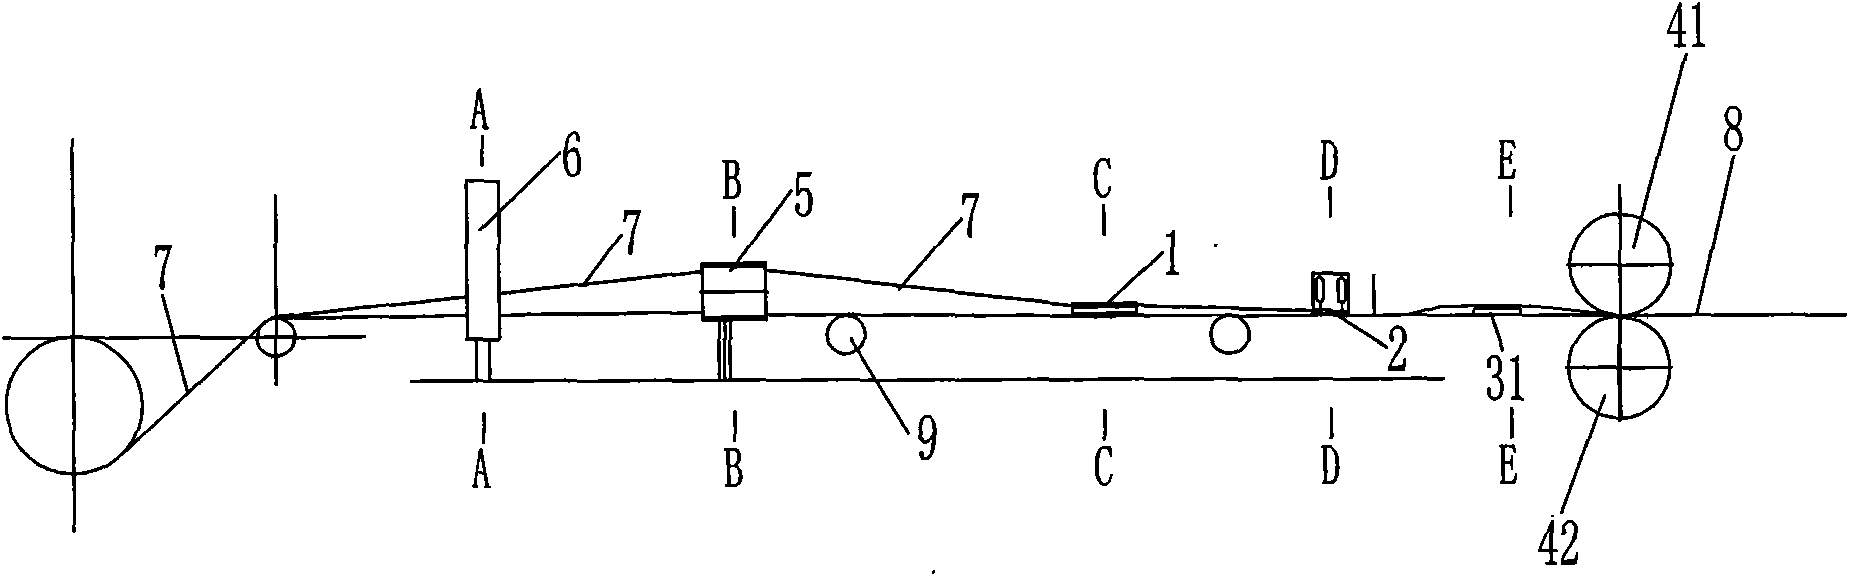 Equipment and process for producing water hose